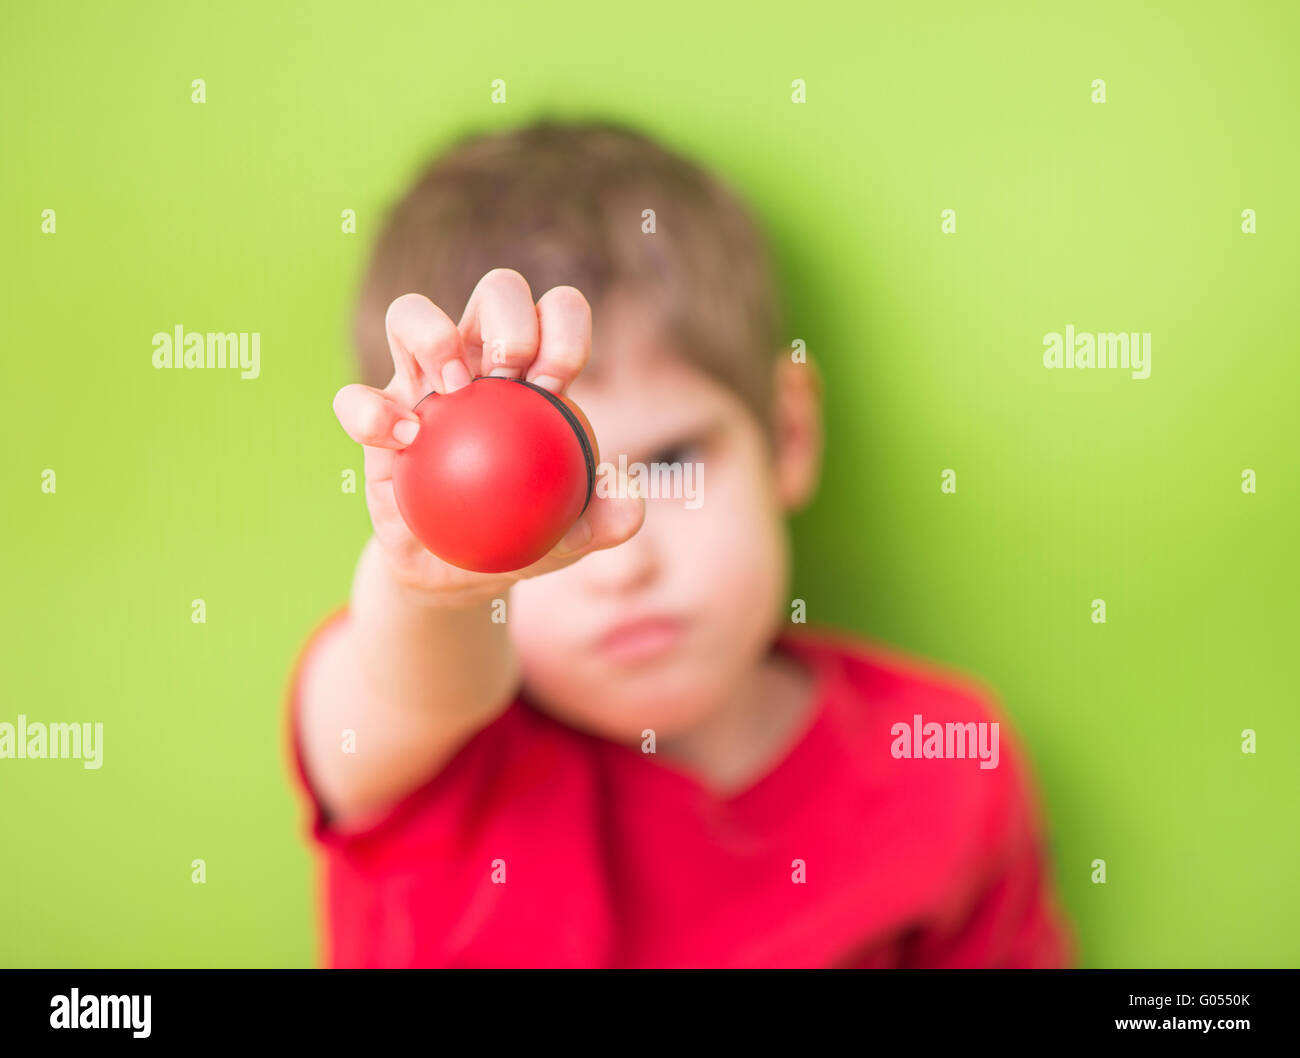 Child holding and squeezing red stress ball with hand. Concept of childhood anxiety, frustration and anger. Also a symbol of bei Stock Photo